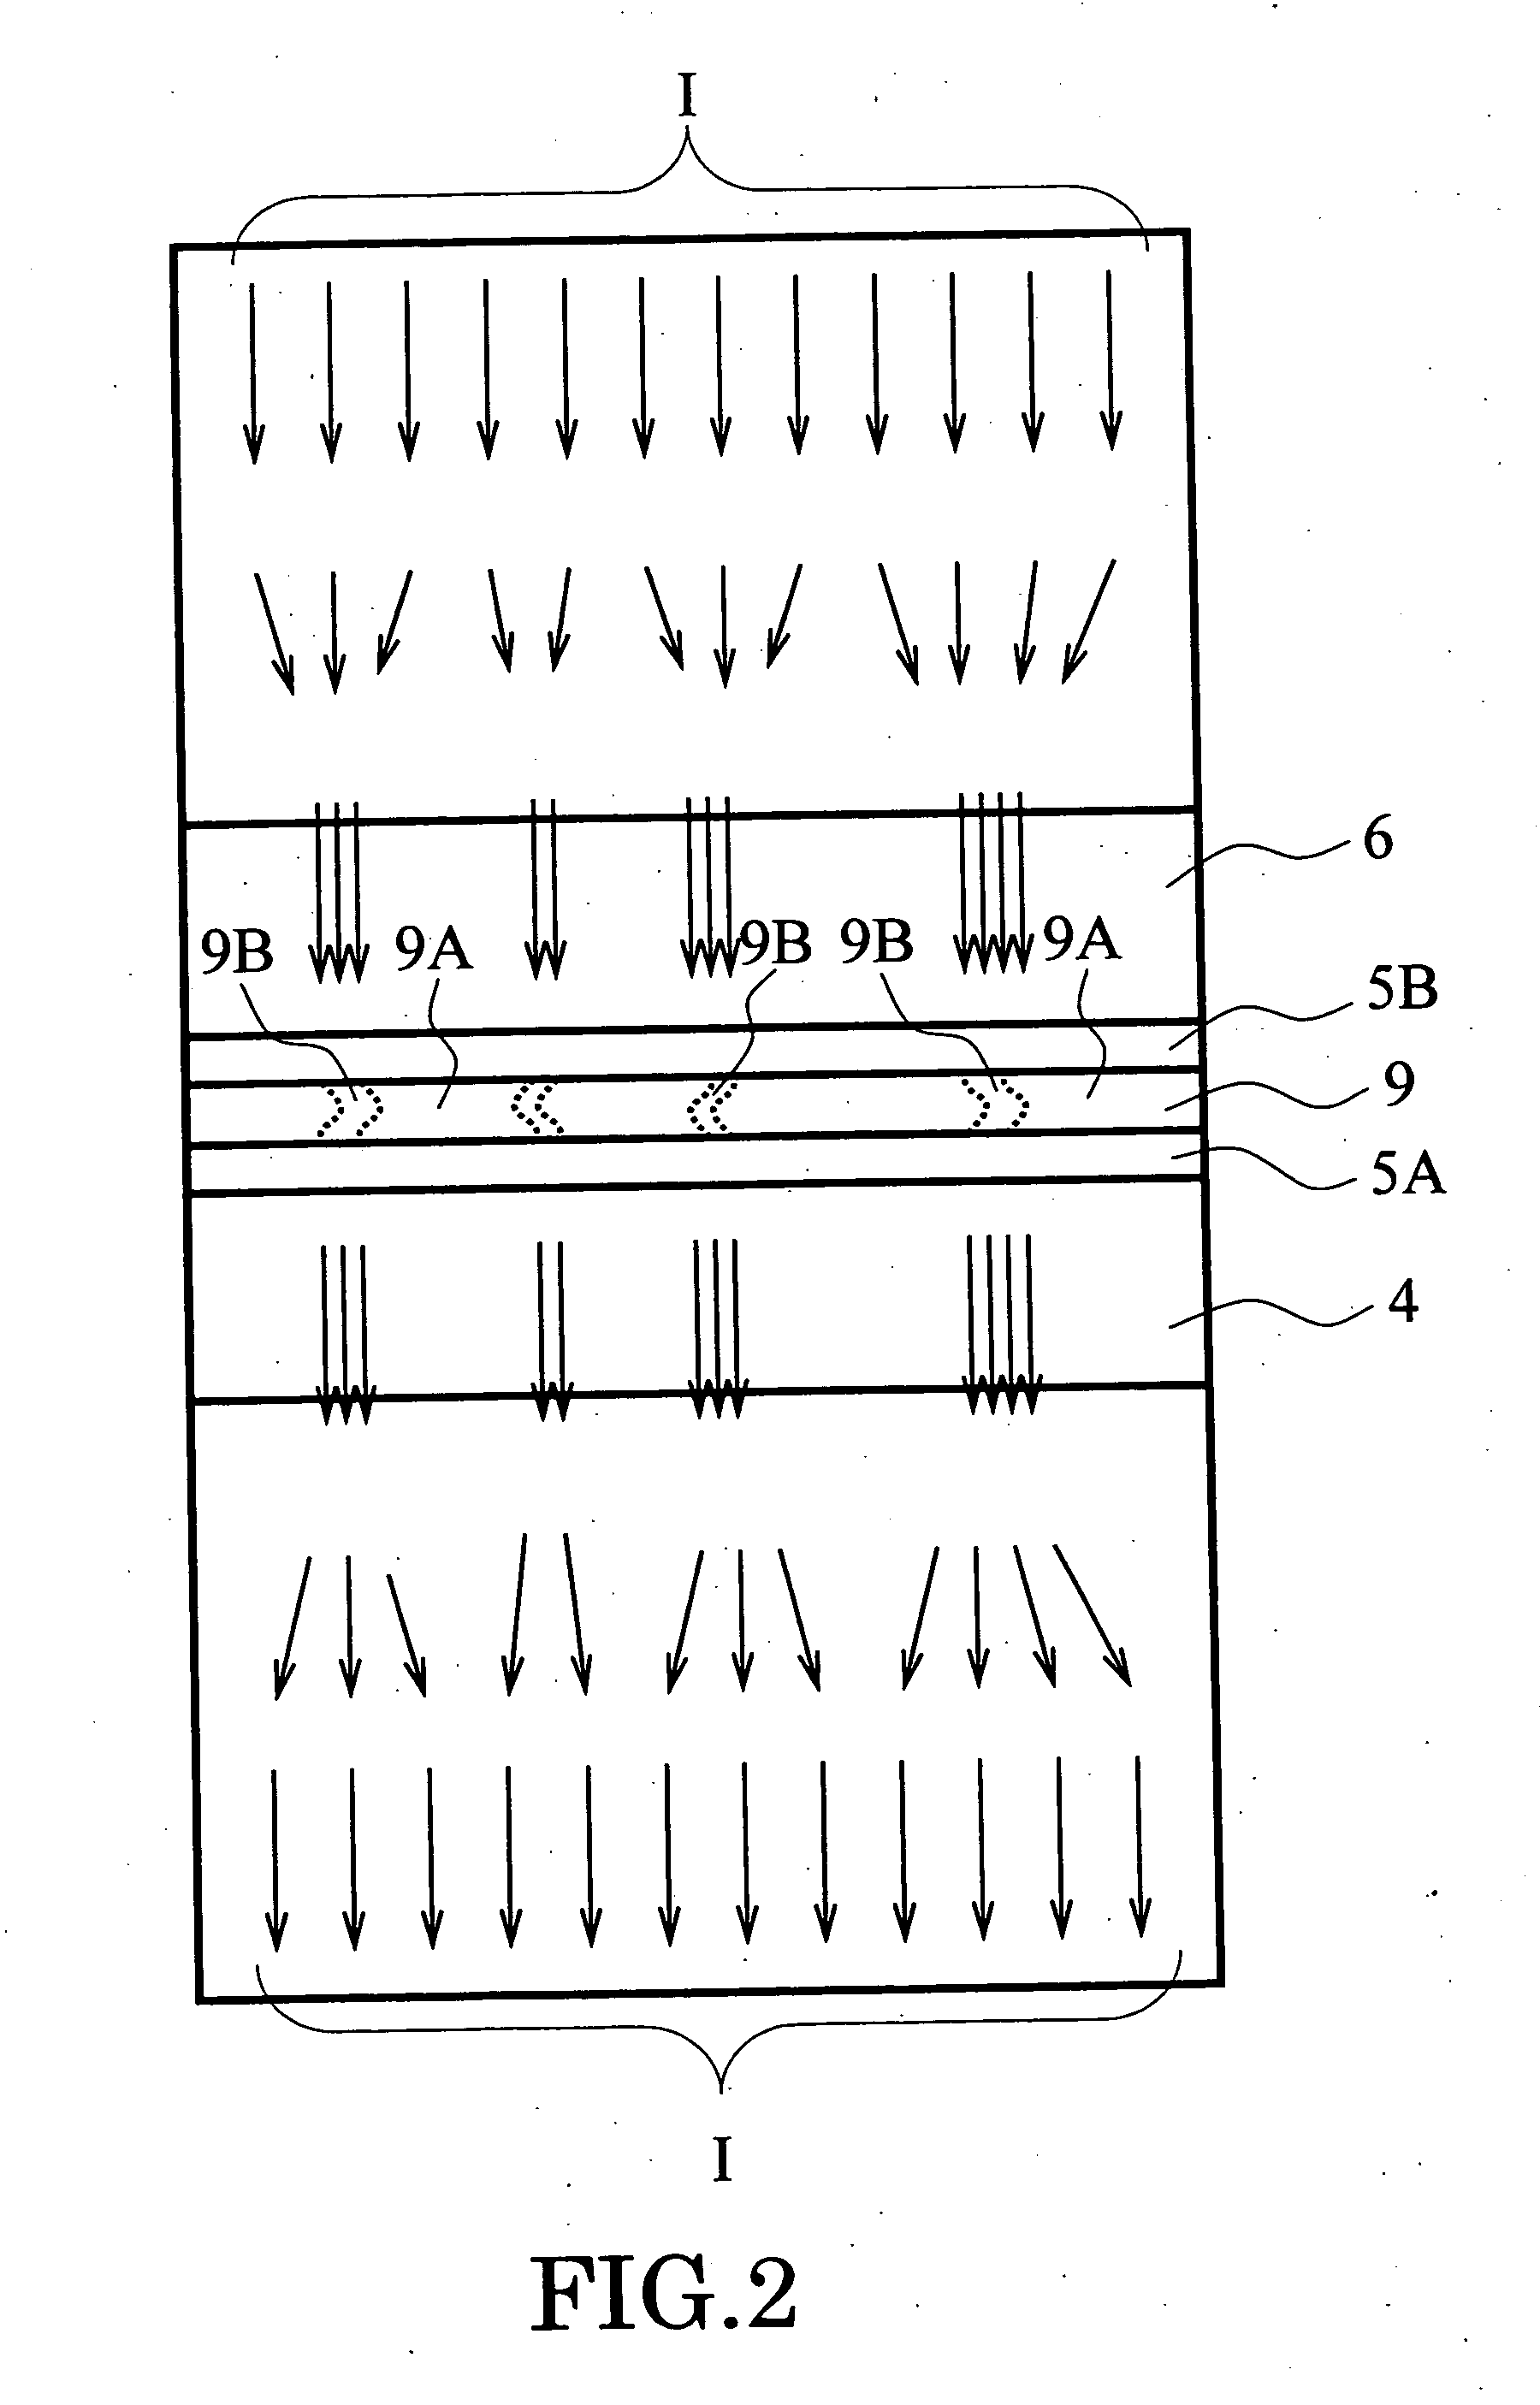 Magnetoresistance effect element having a nonmagnetic intermediate layer having a two-dimensional fluctuation of resistance